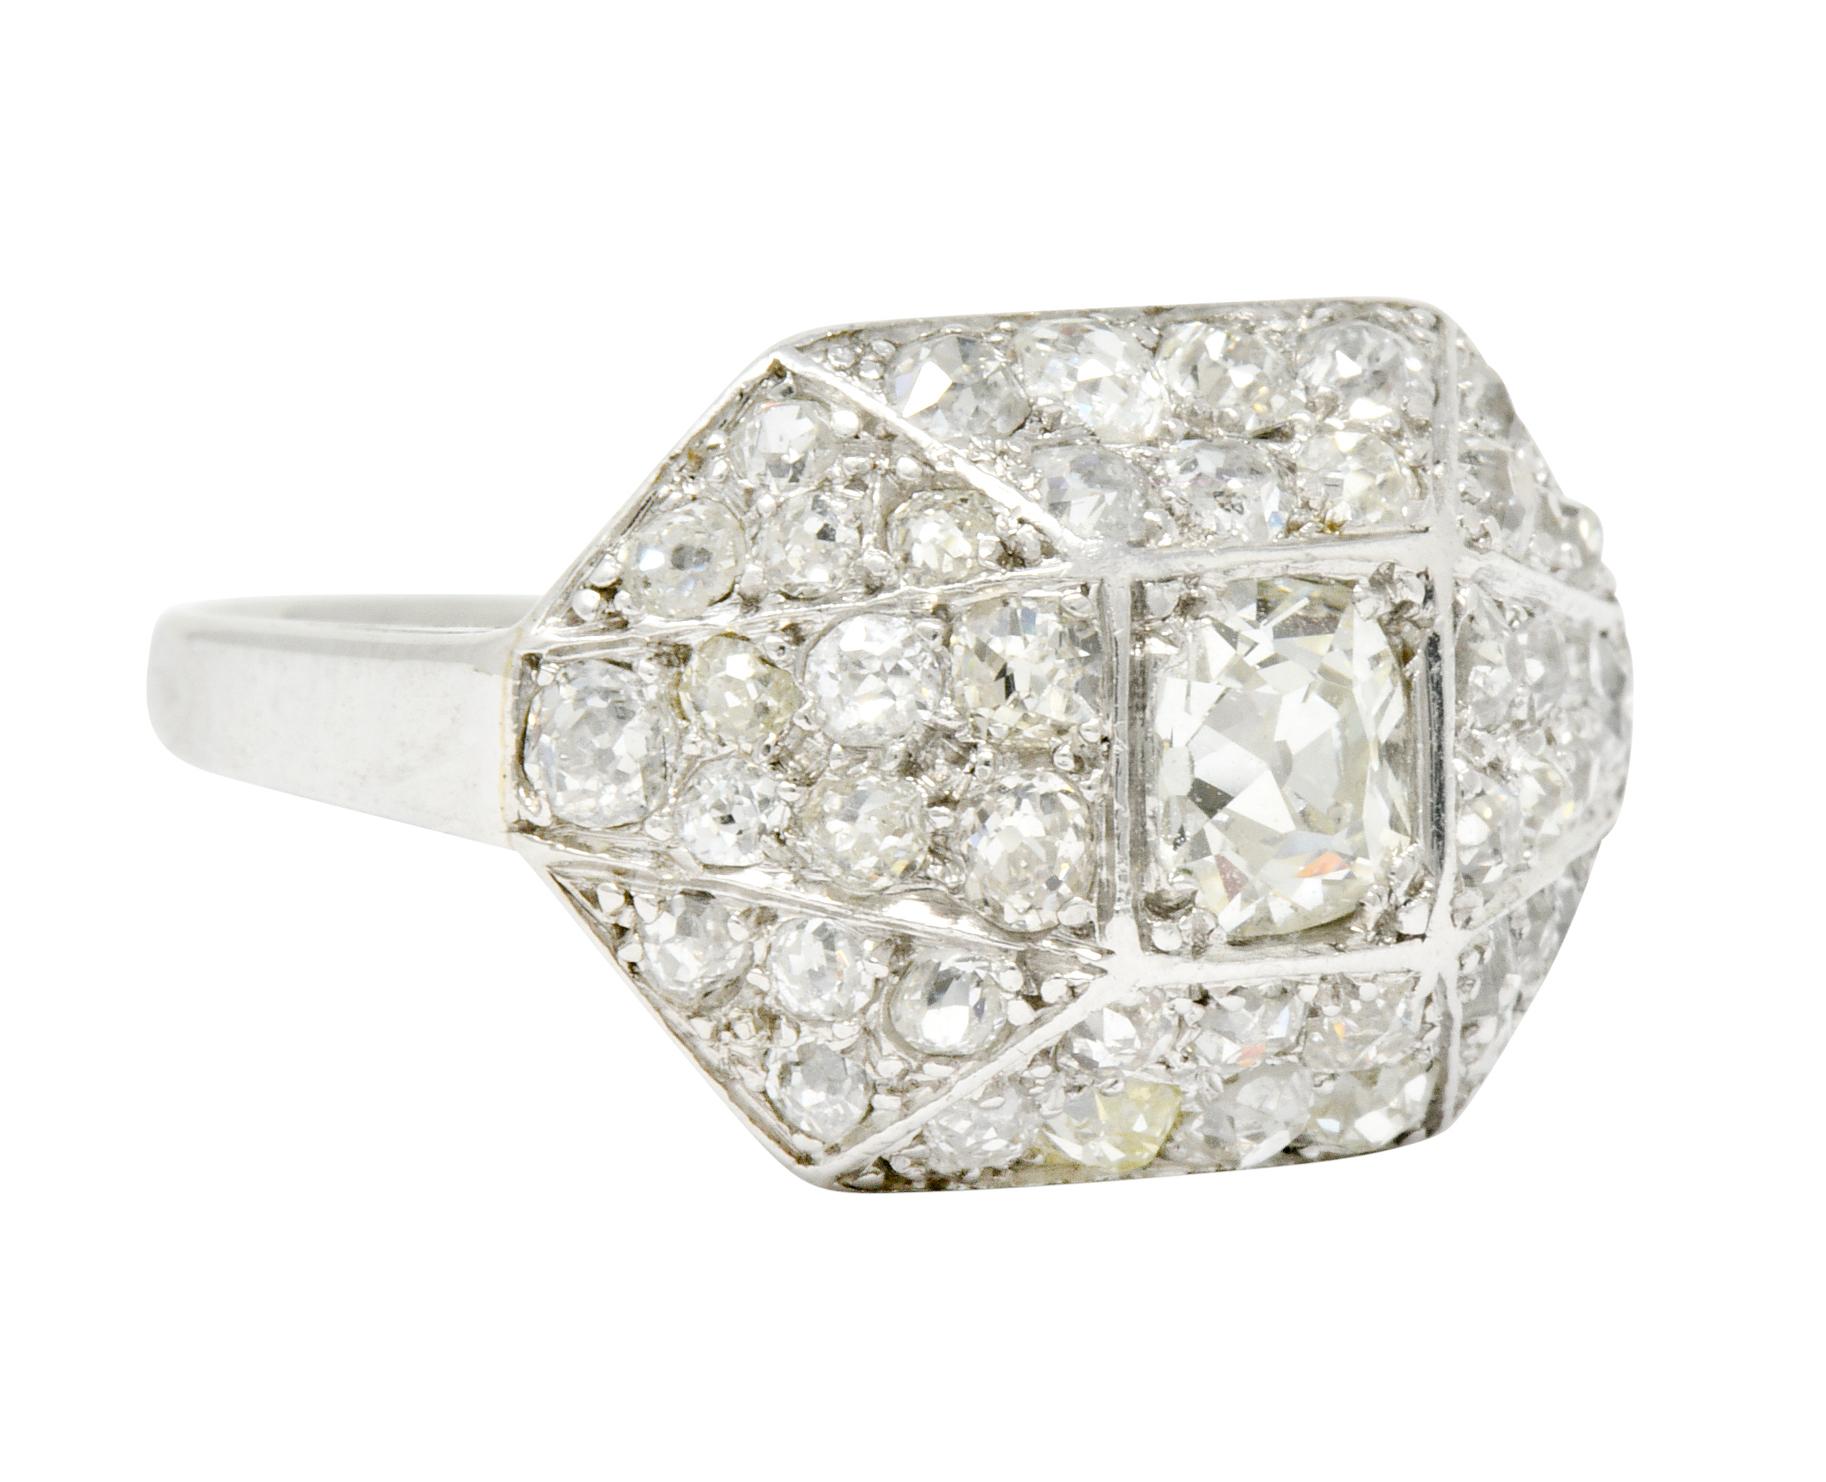 Dinner style ring designed as an elongated pyramidal form

Centering an old mine cut diamond, set in a recessed square form head, weighing 
approximately 0.50 carat; F color with VS clarity

Surrounded by pave set old mine cut diamonds weighing